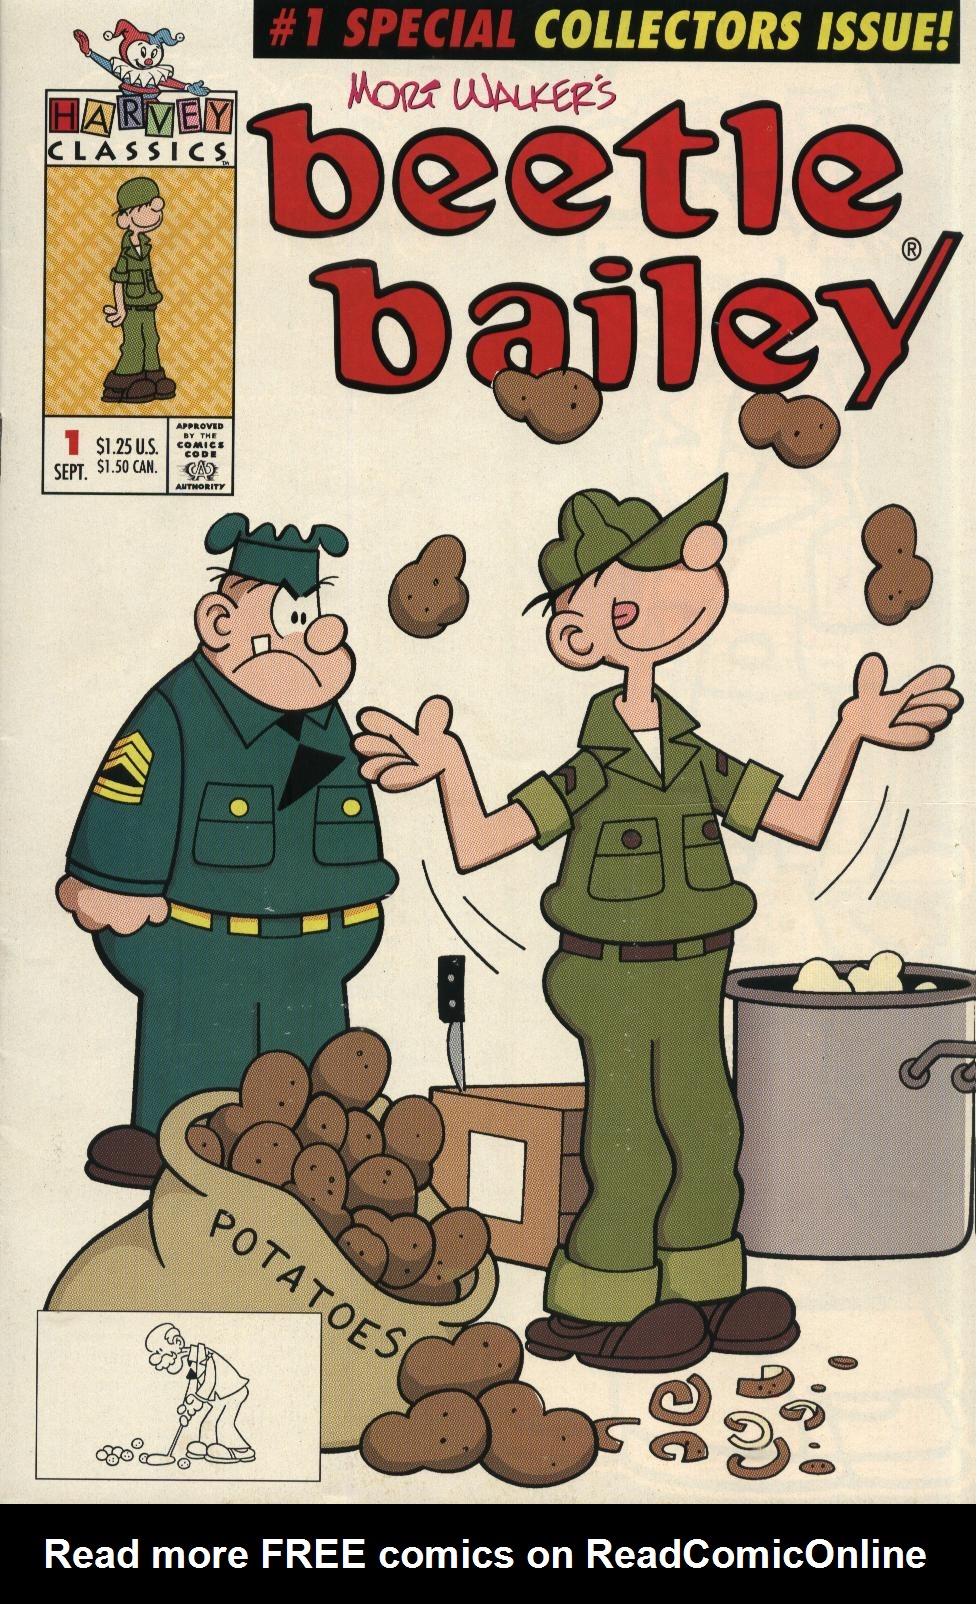 Beetle Bailey Issue 1 | Read Beetle Bailey Issue 1 comic online in high  quality. Read Full Comic online for free - Read comics online in high  quality .|viewcomiconline.com